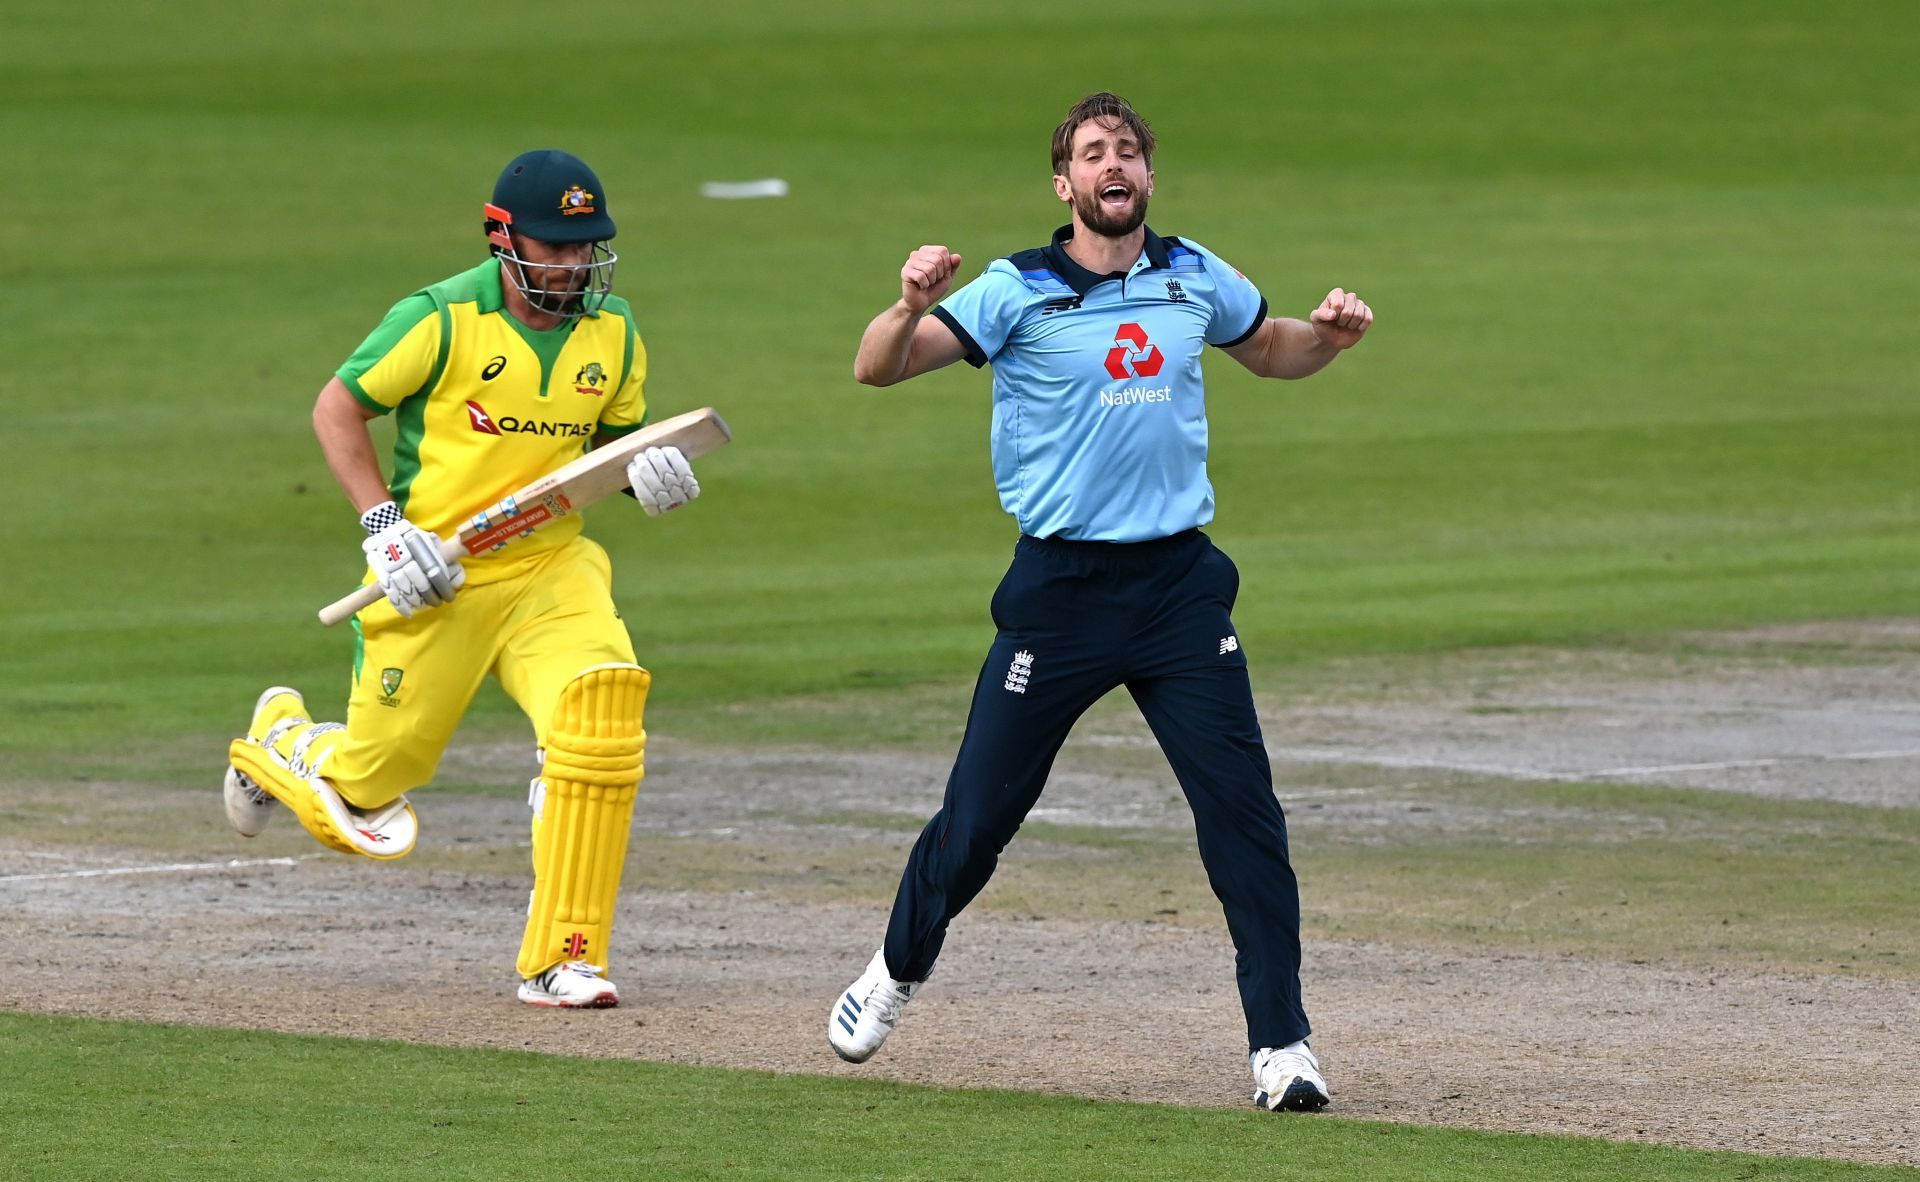 Australia and England will meet in the ICC T20 World Cup 2021 tomorrow